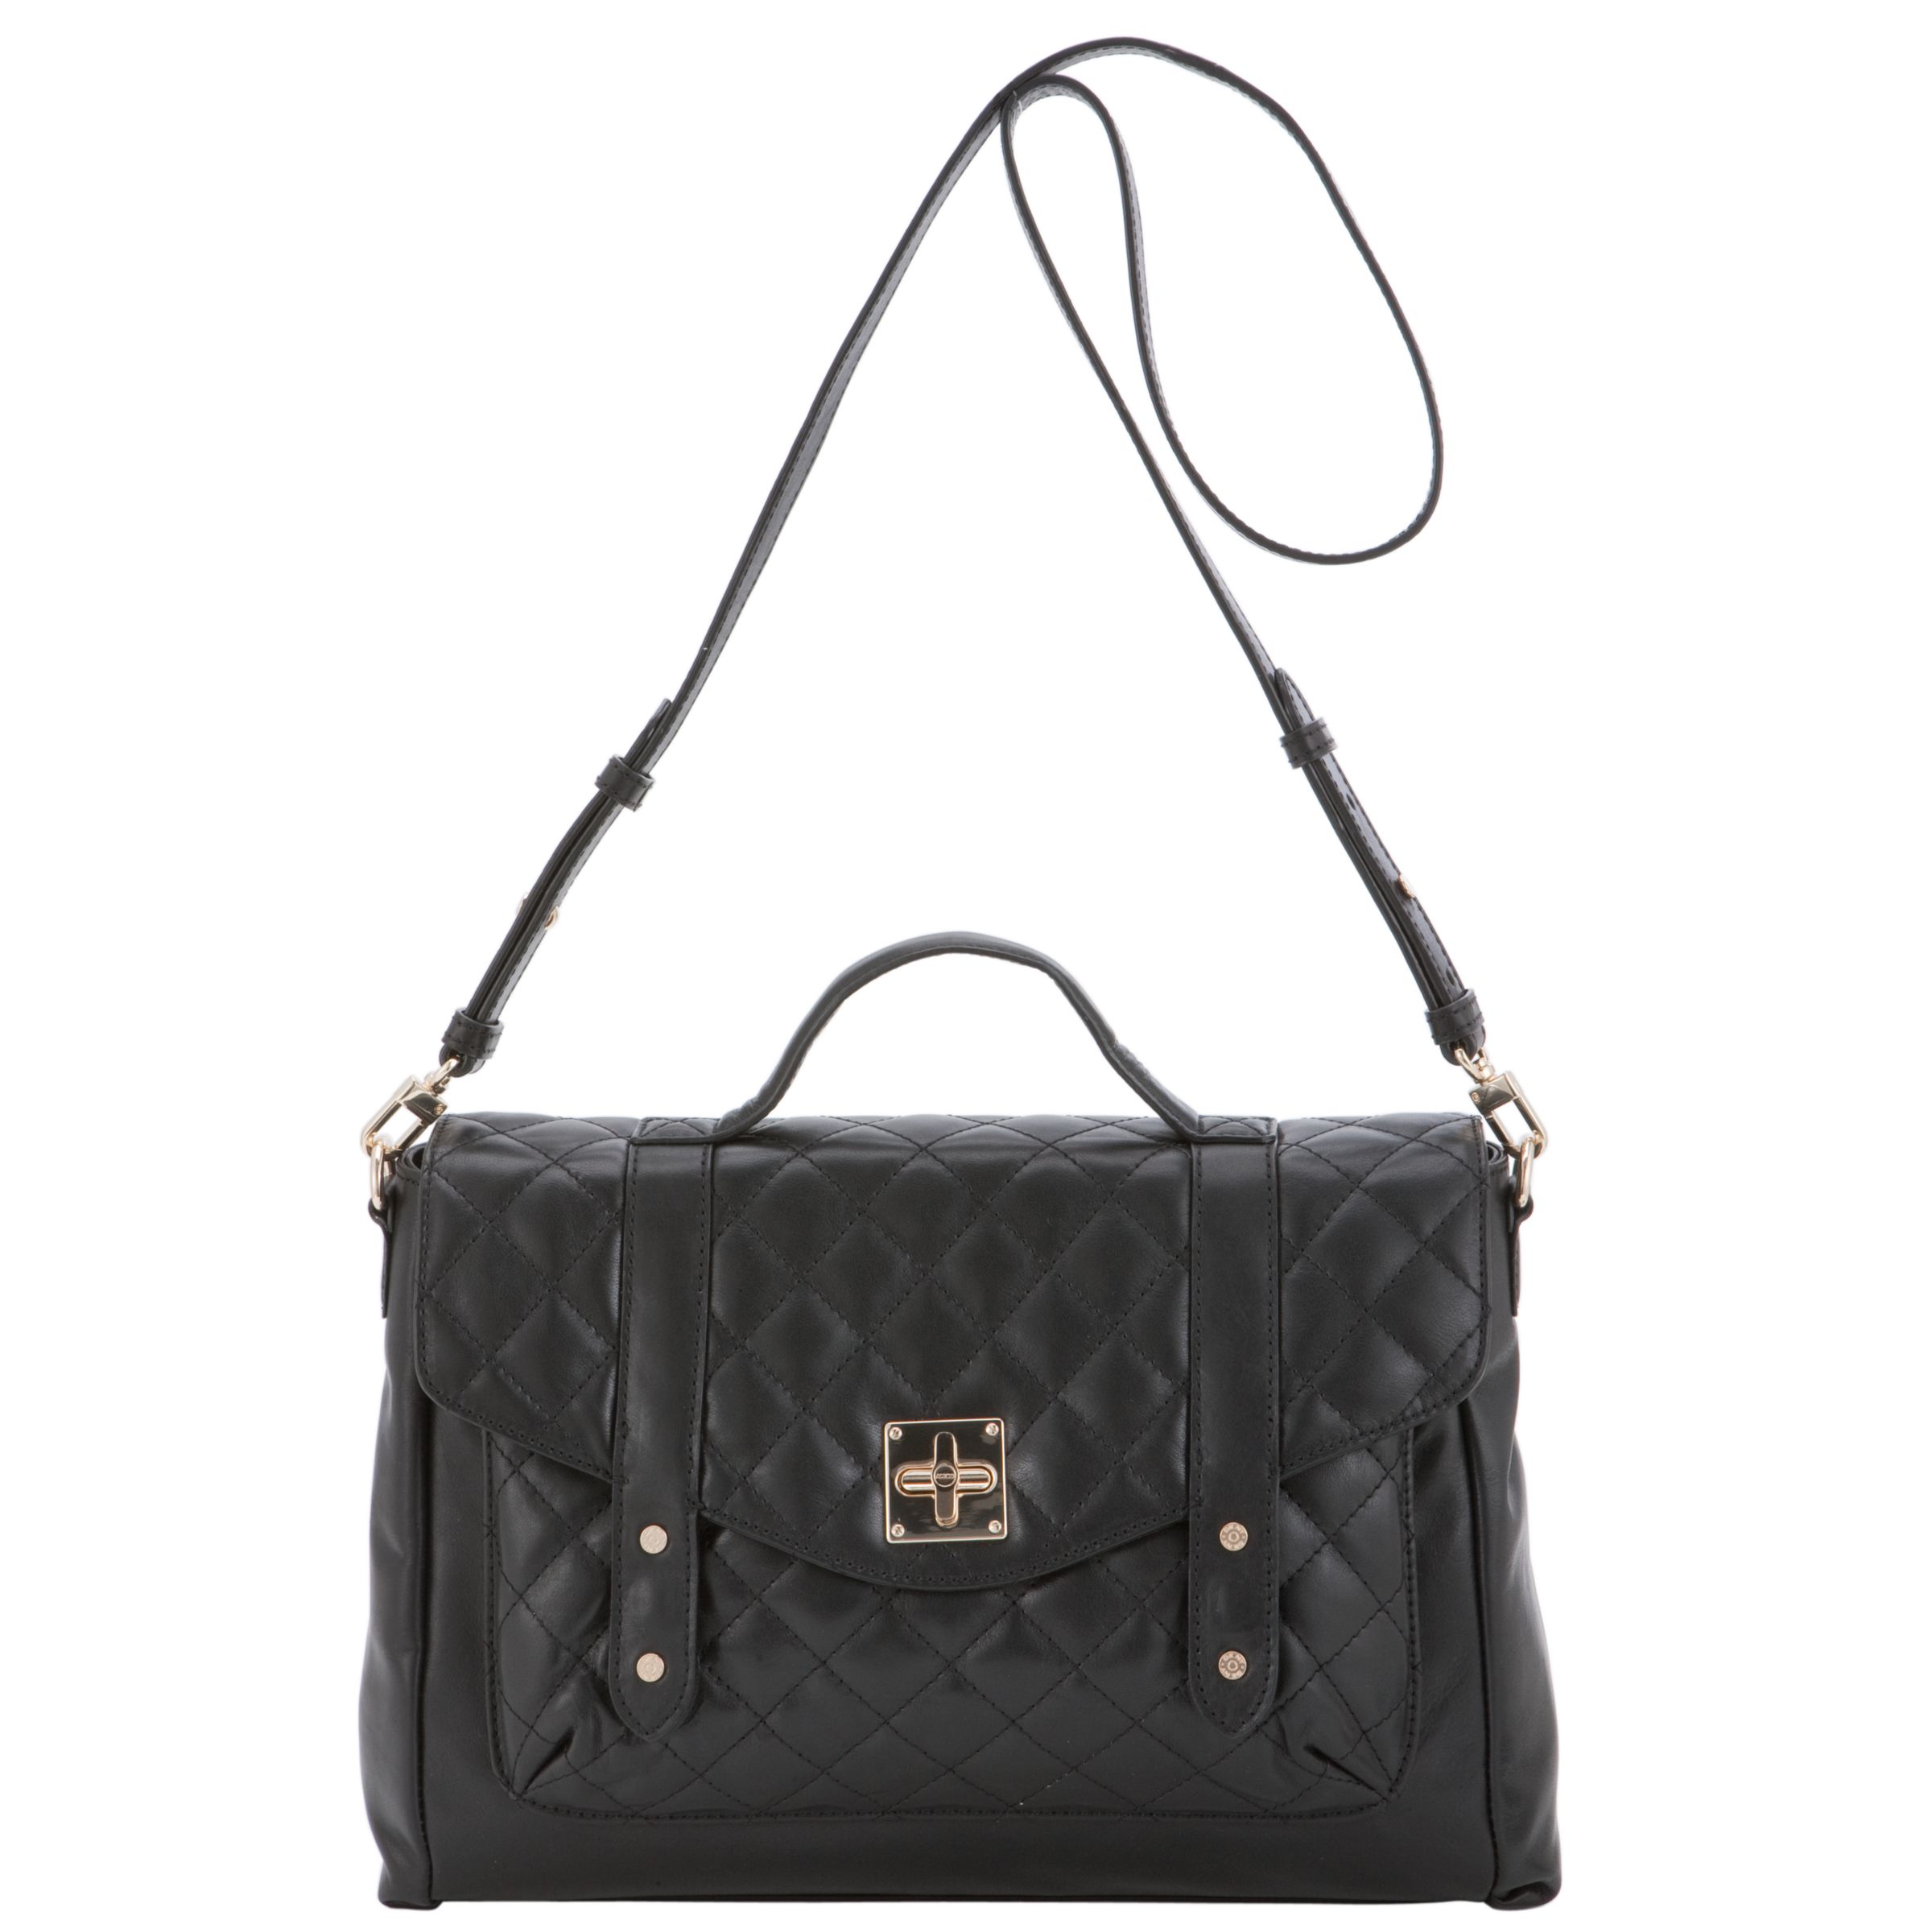 DKNY Quilted Leather Satchel with Turnlock Handbag, Black at John Lewis